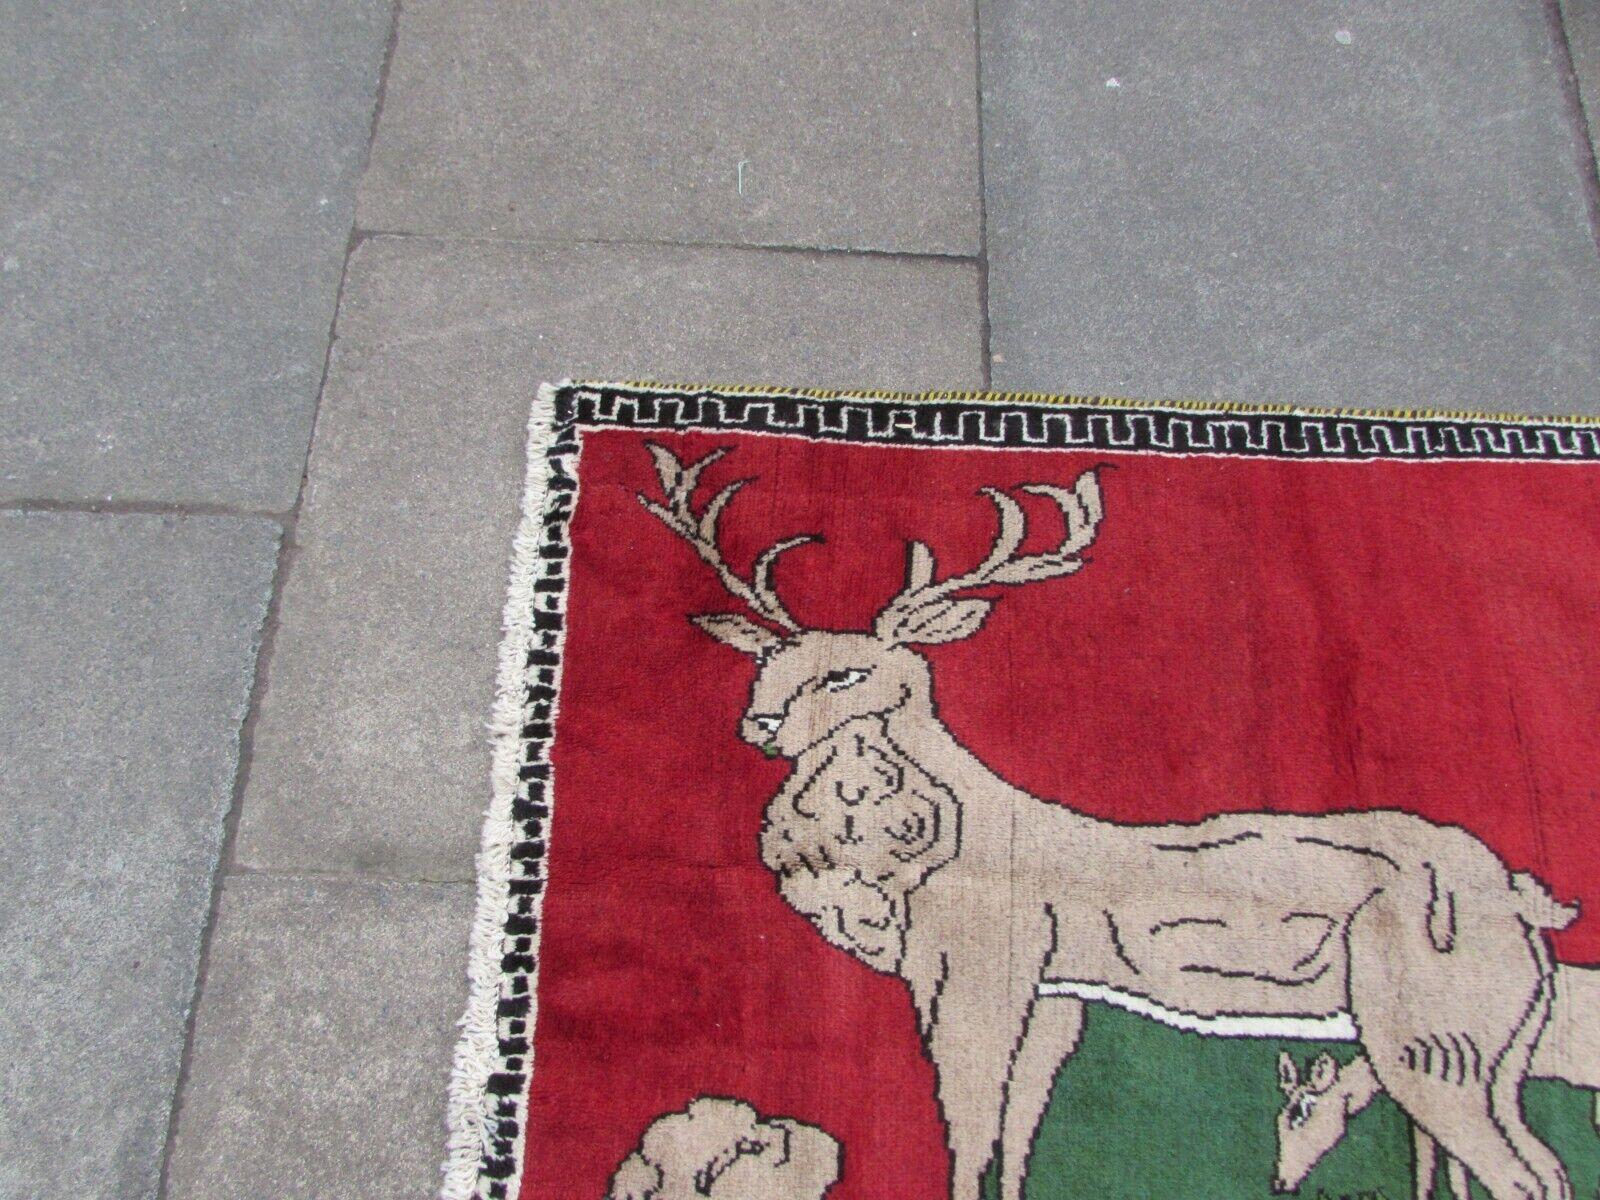 Wool Handmade Vintage Persian Style Gabbeh Rug With Deer 2.6' x 4', 1970s - 1Q71 For Sale